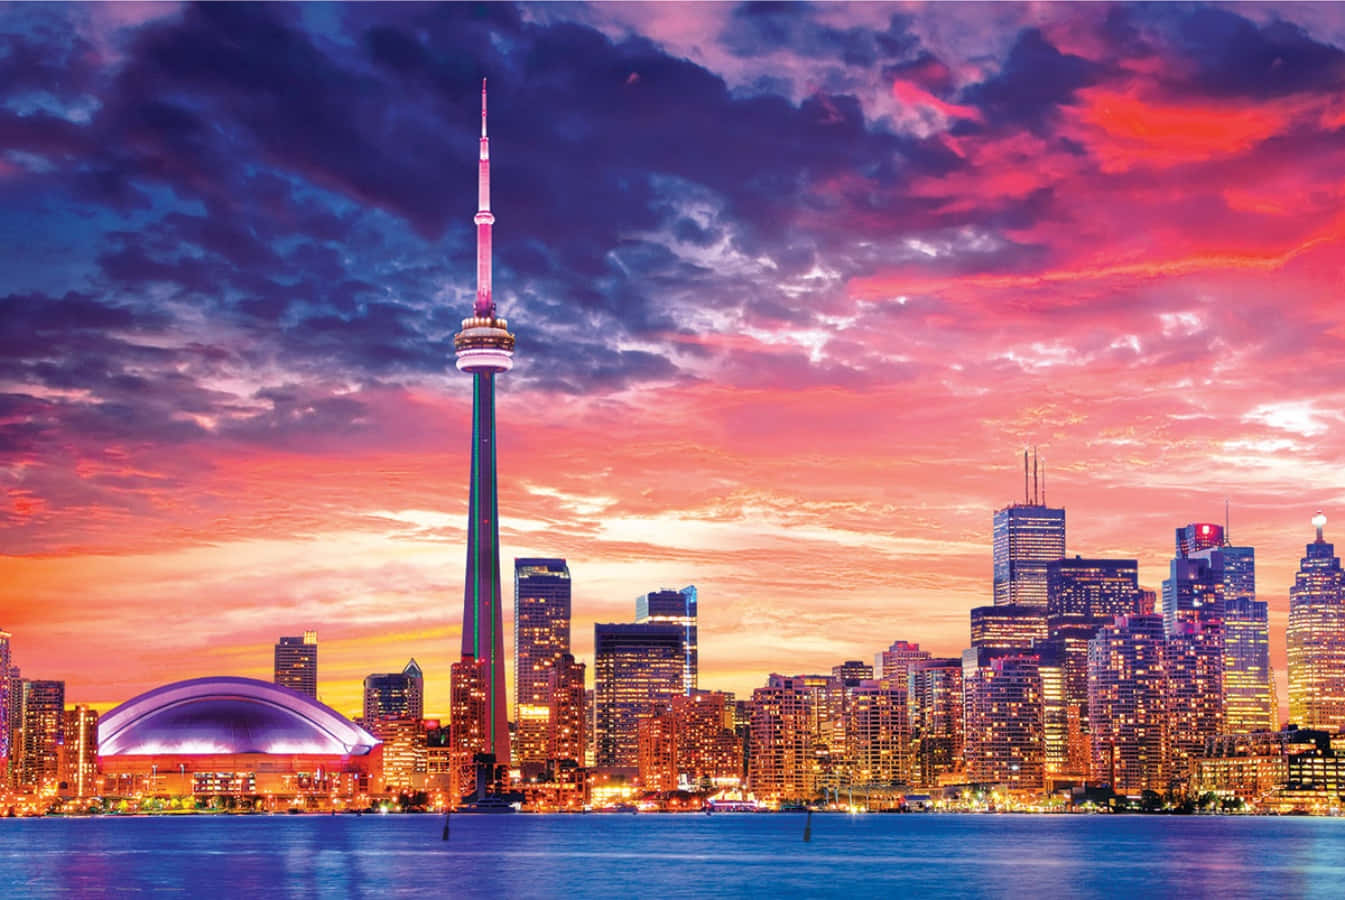 Incredible view of the Toronto skyline in all its majesty.